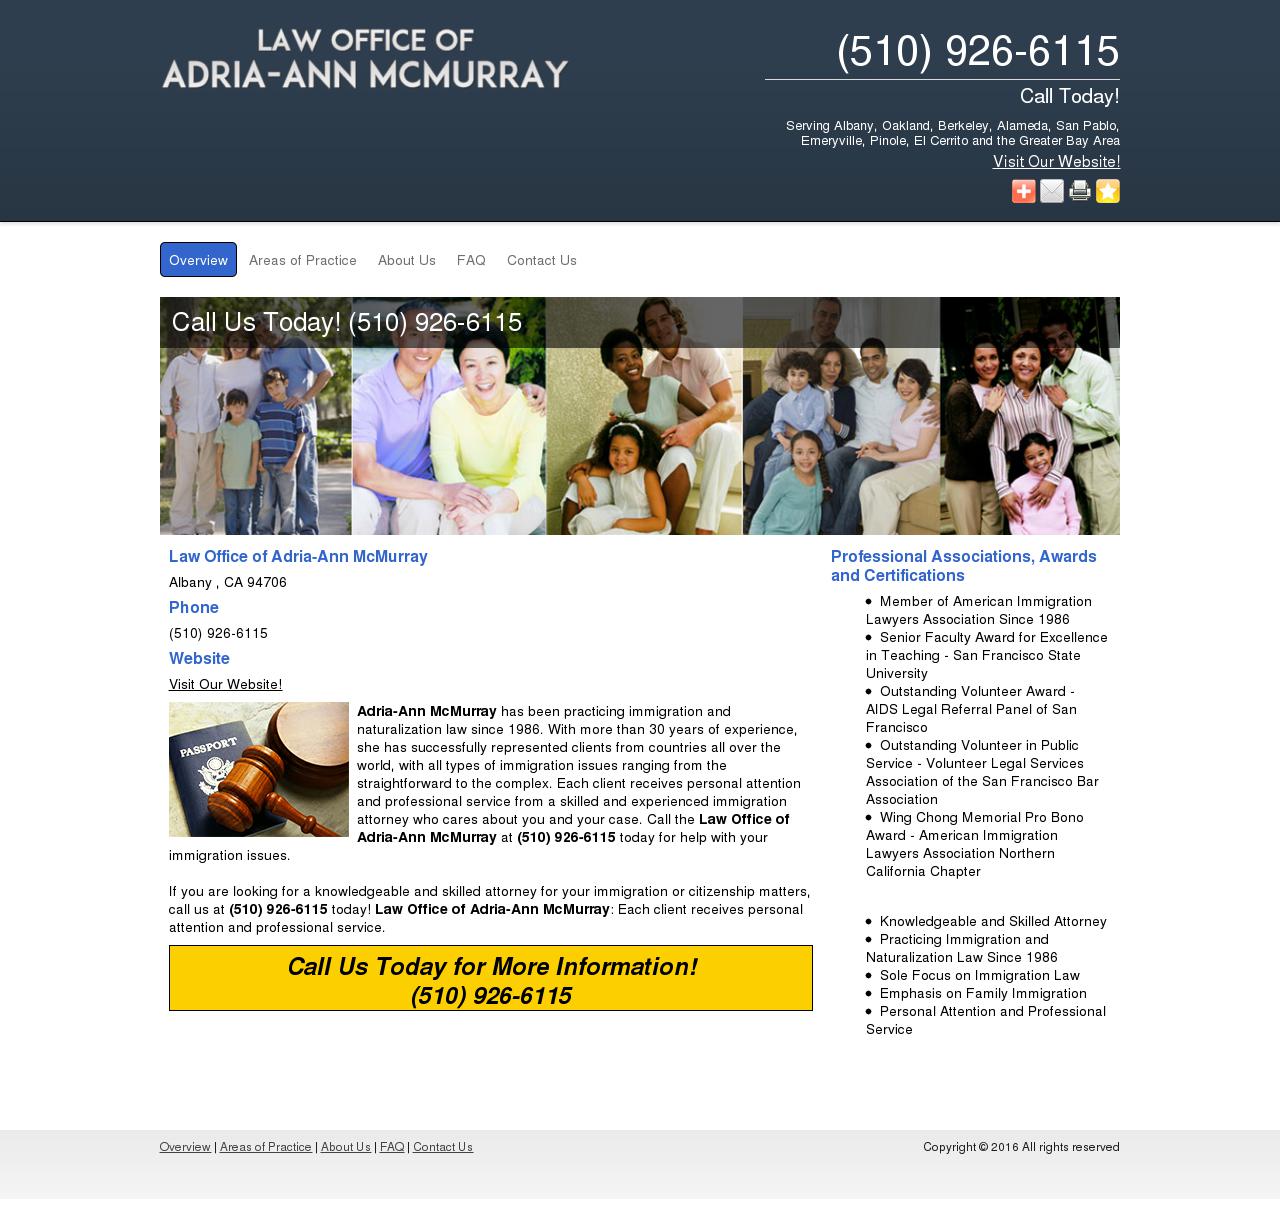 Adria-Ann McMurray Law Office of - Albany CA Lawyers